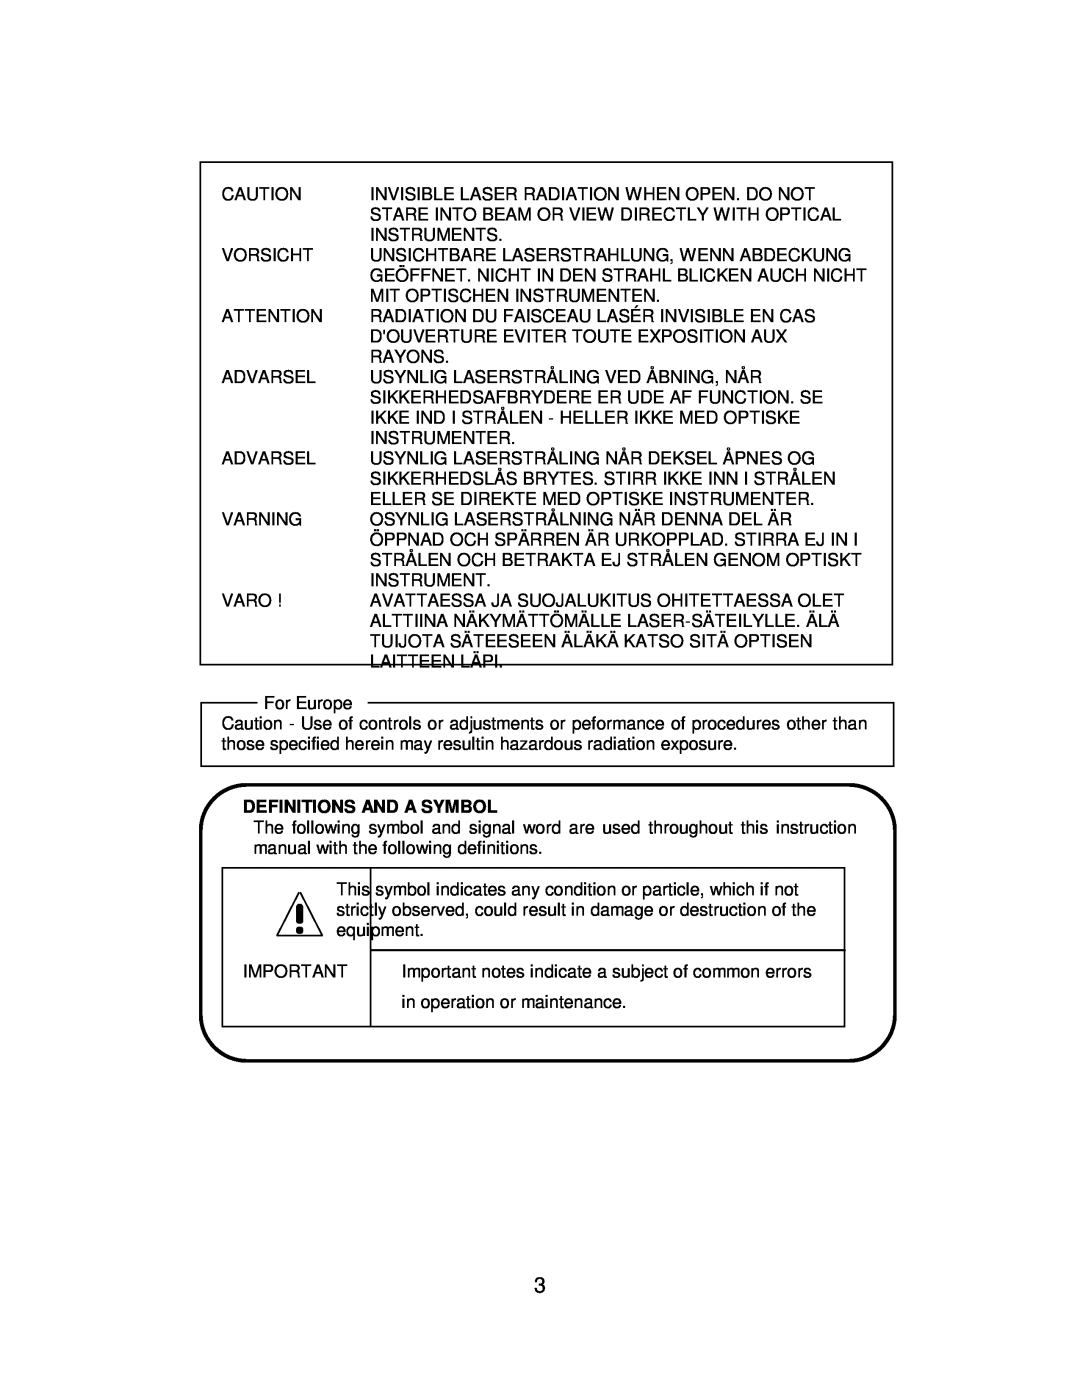 Hitachi CDR-8130 instruction manual Definitions And A Symbol 